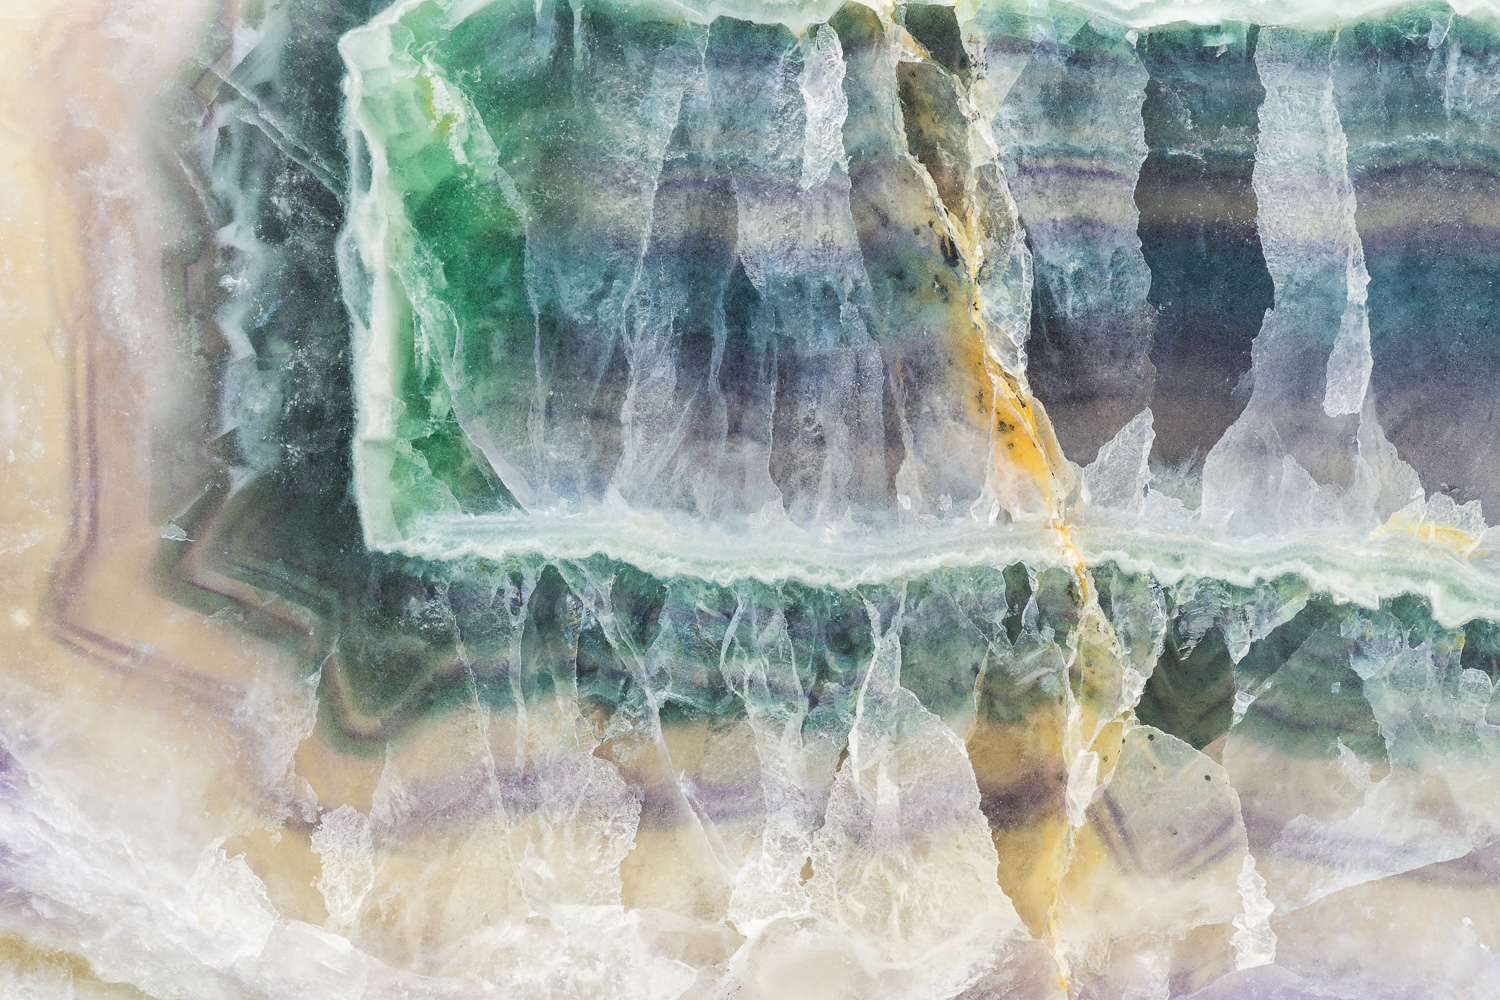 Macro photograph of a slab of fluorite (calcium fluoride) from the Jiangxi Province in China Image #2510